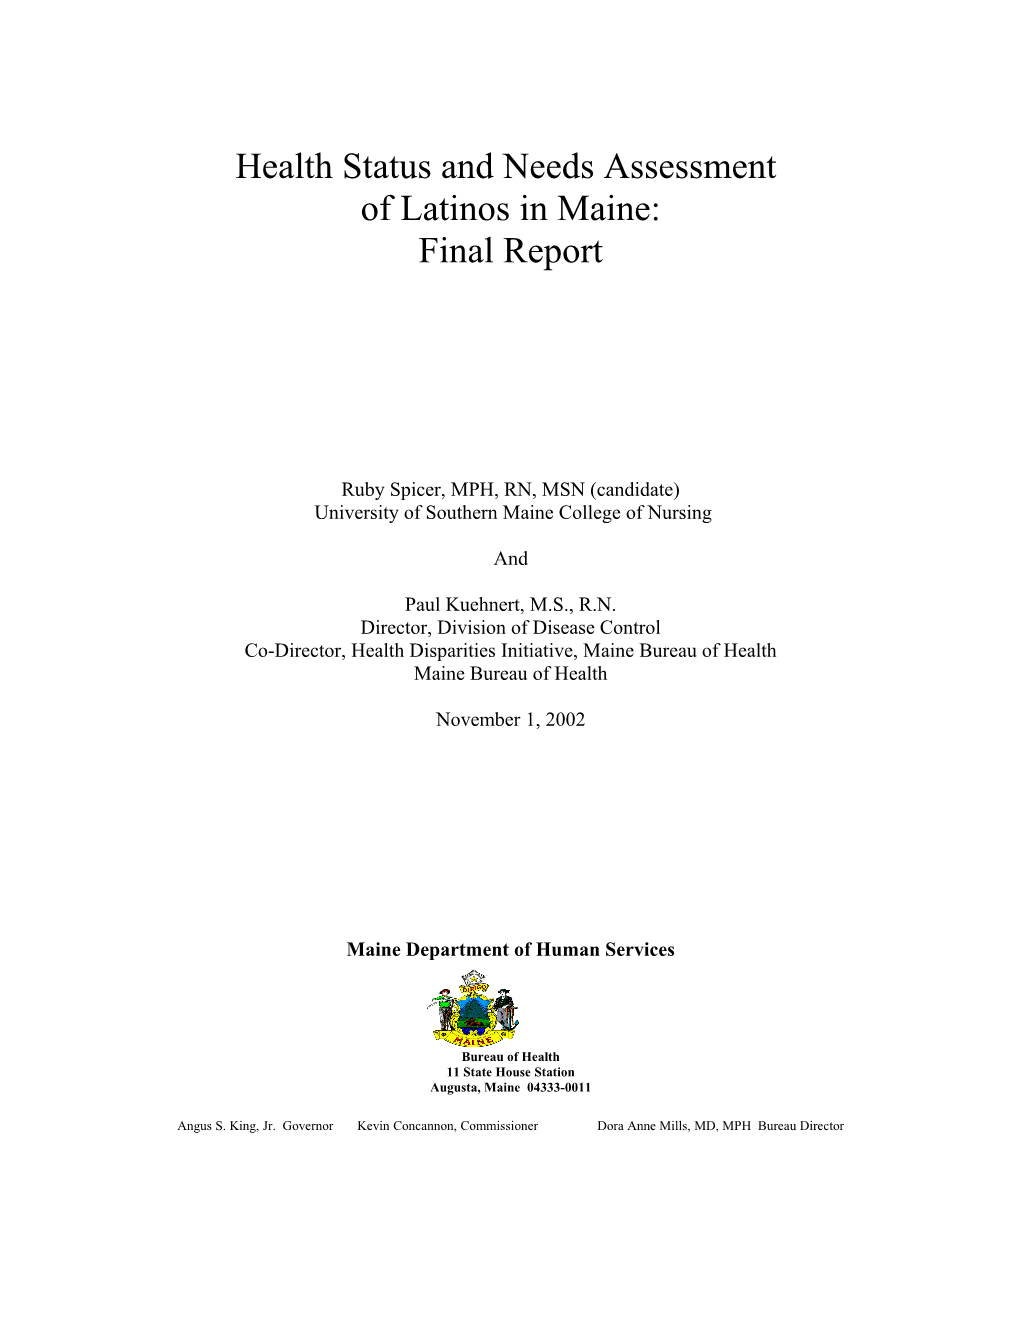 The Goals of This Health Needs Assessment and Analysis of the Latino Population of Maine Were